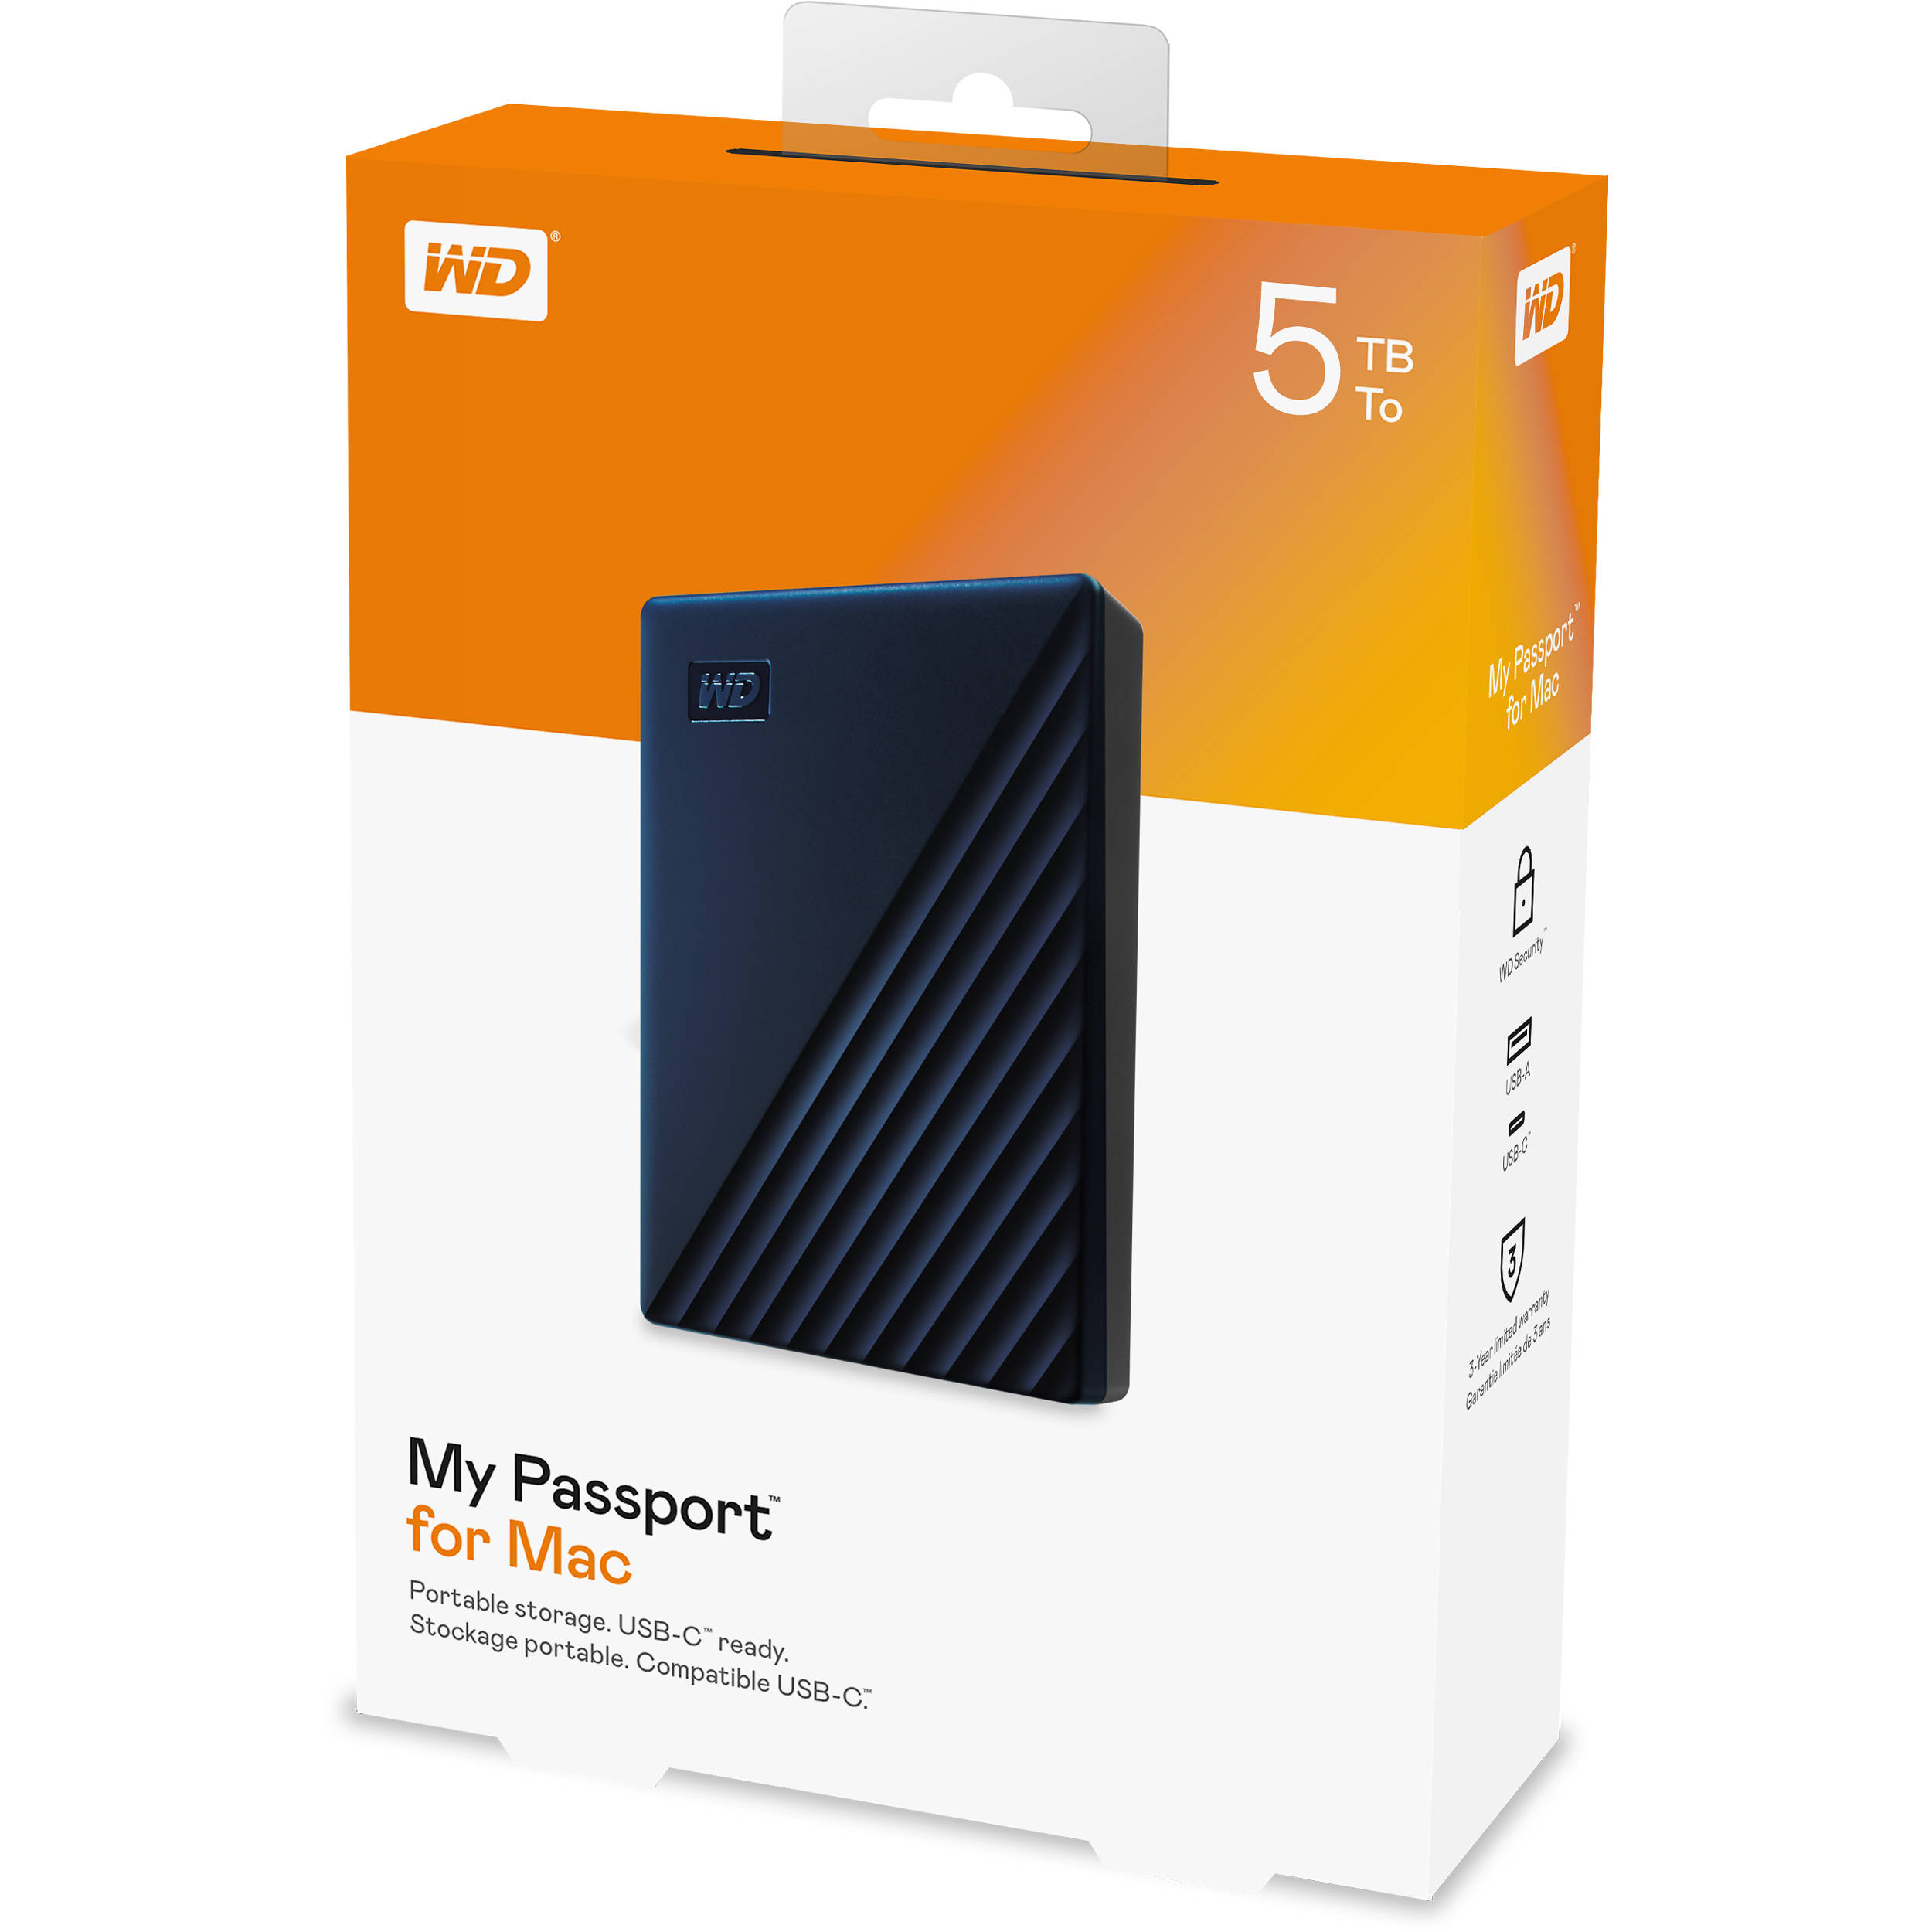 format wd my passport ultra for mac and windows on windows